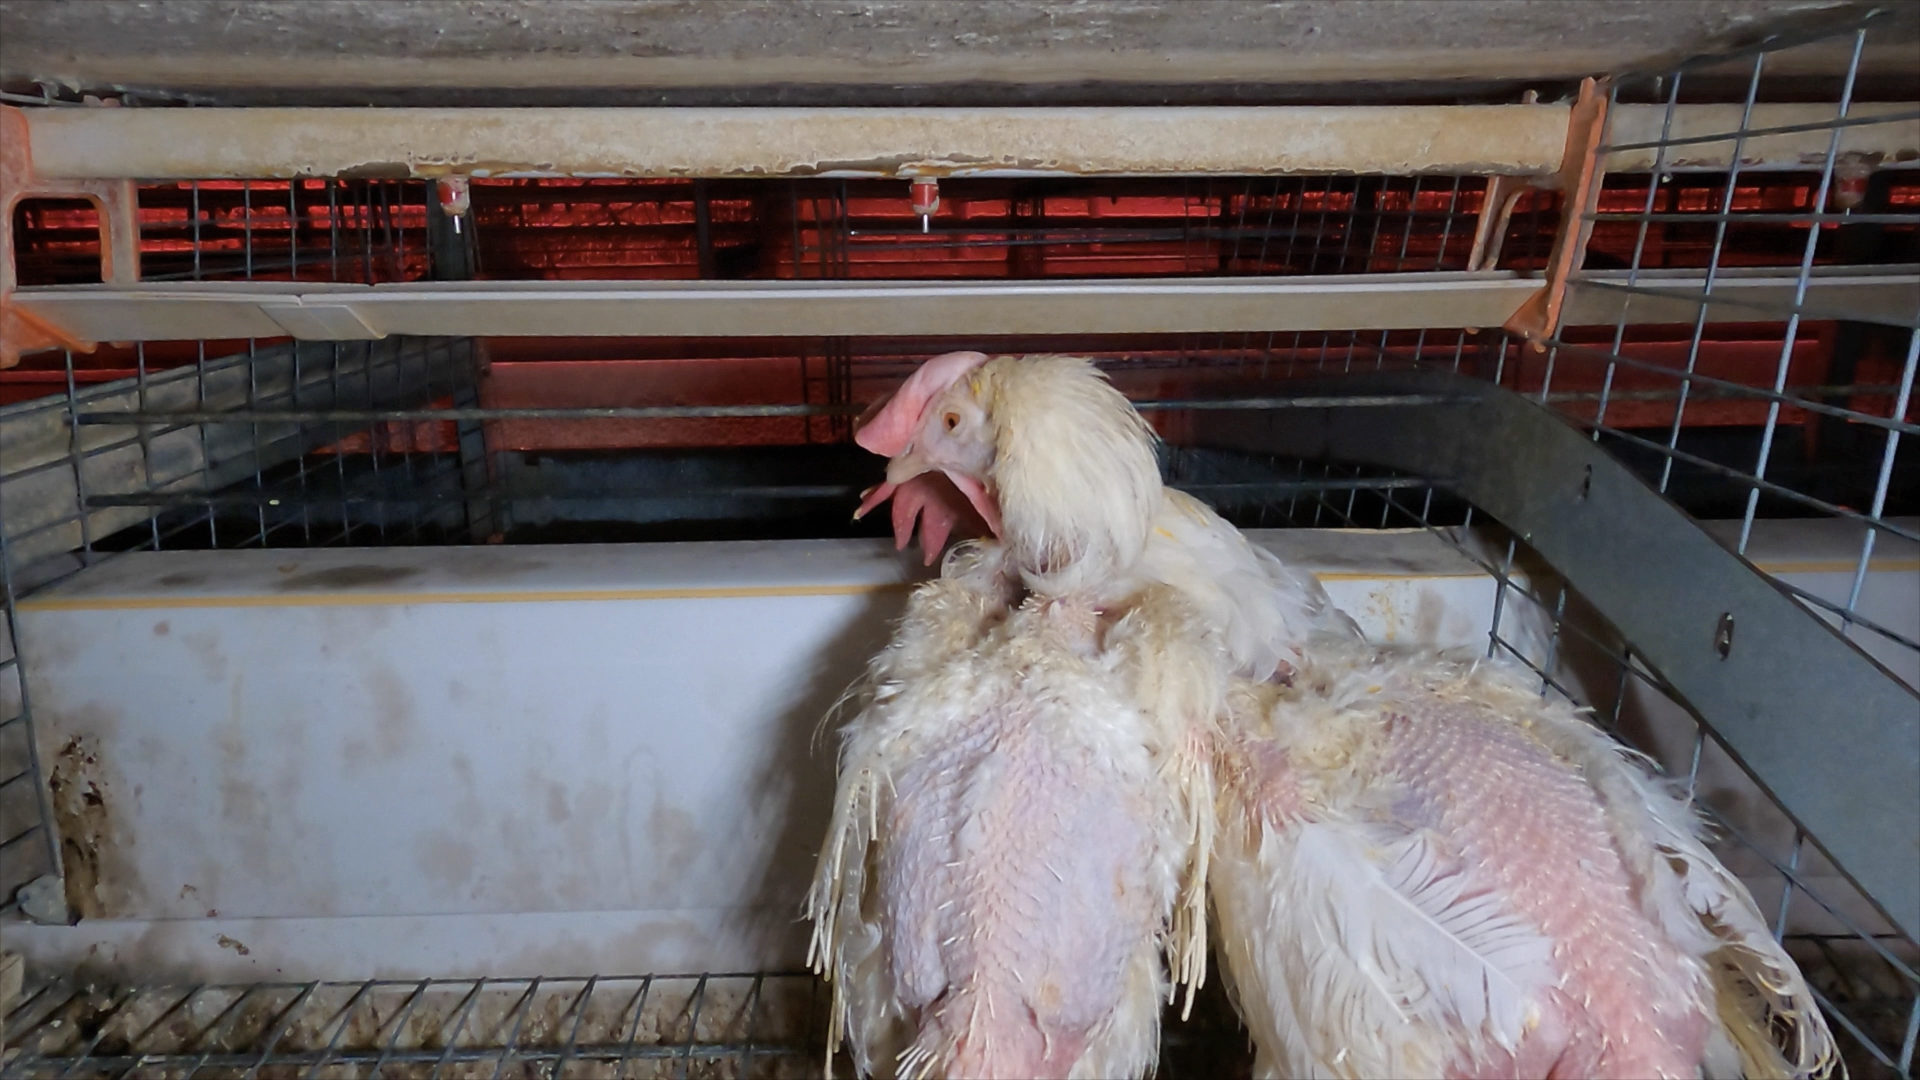 Two hens who have feathers missing and appear to be in poor body condition peer out of a metal cage.